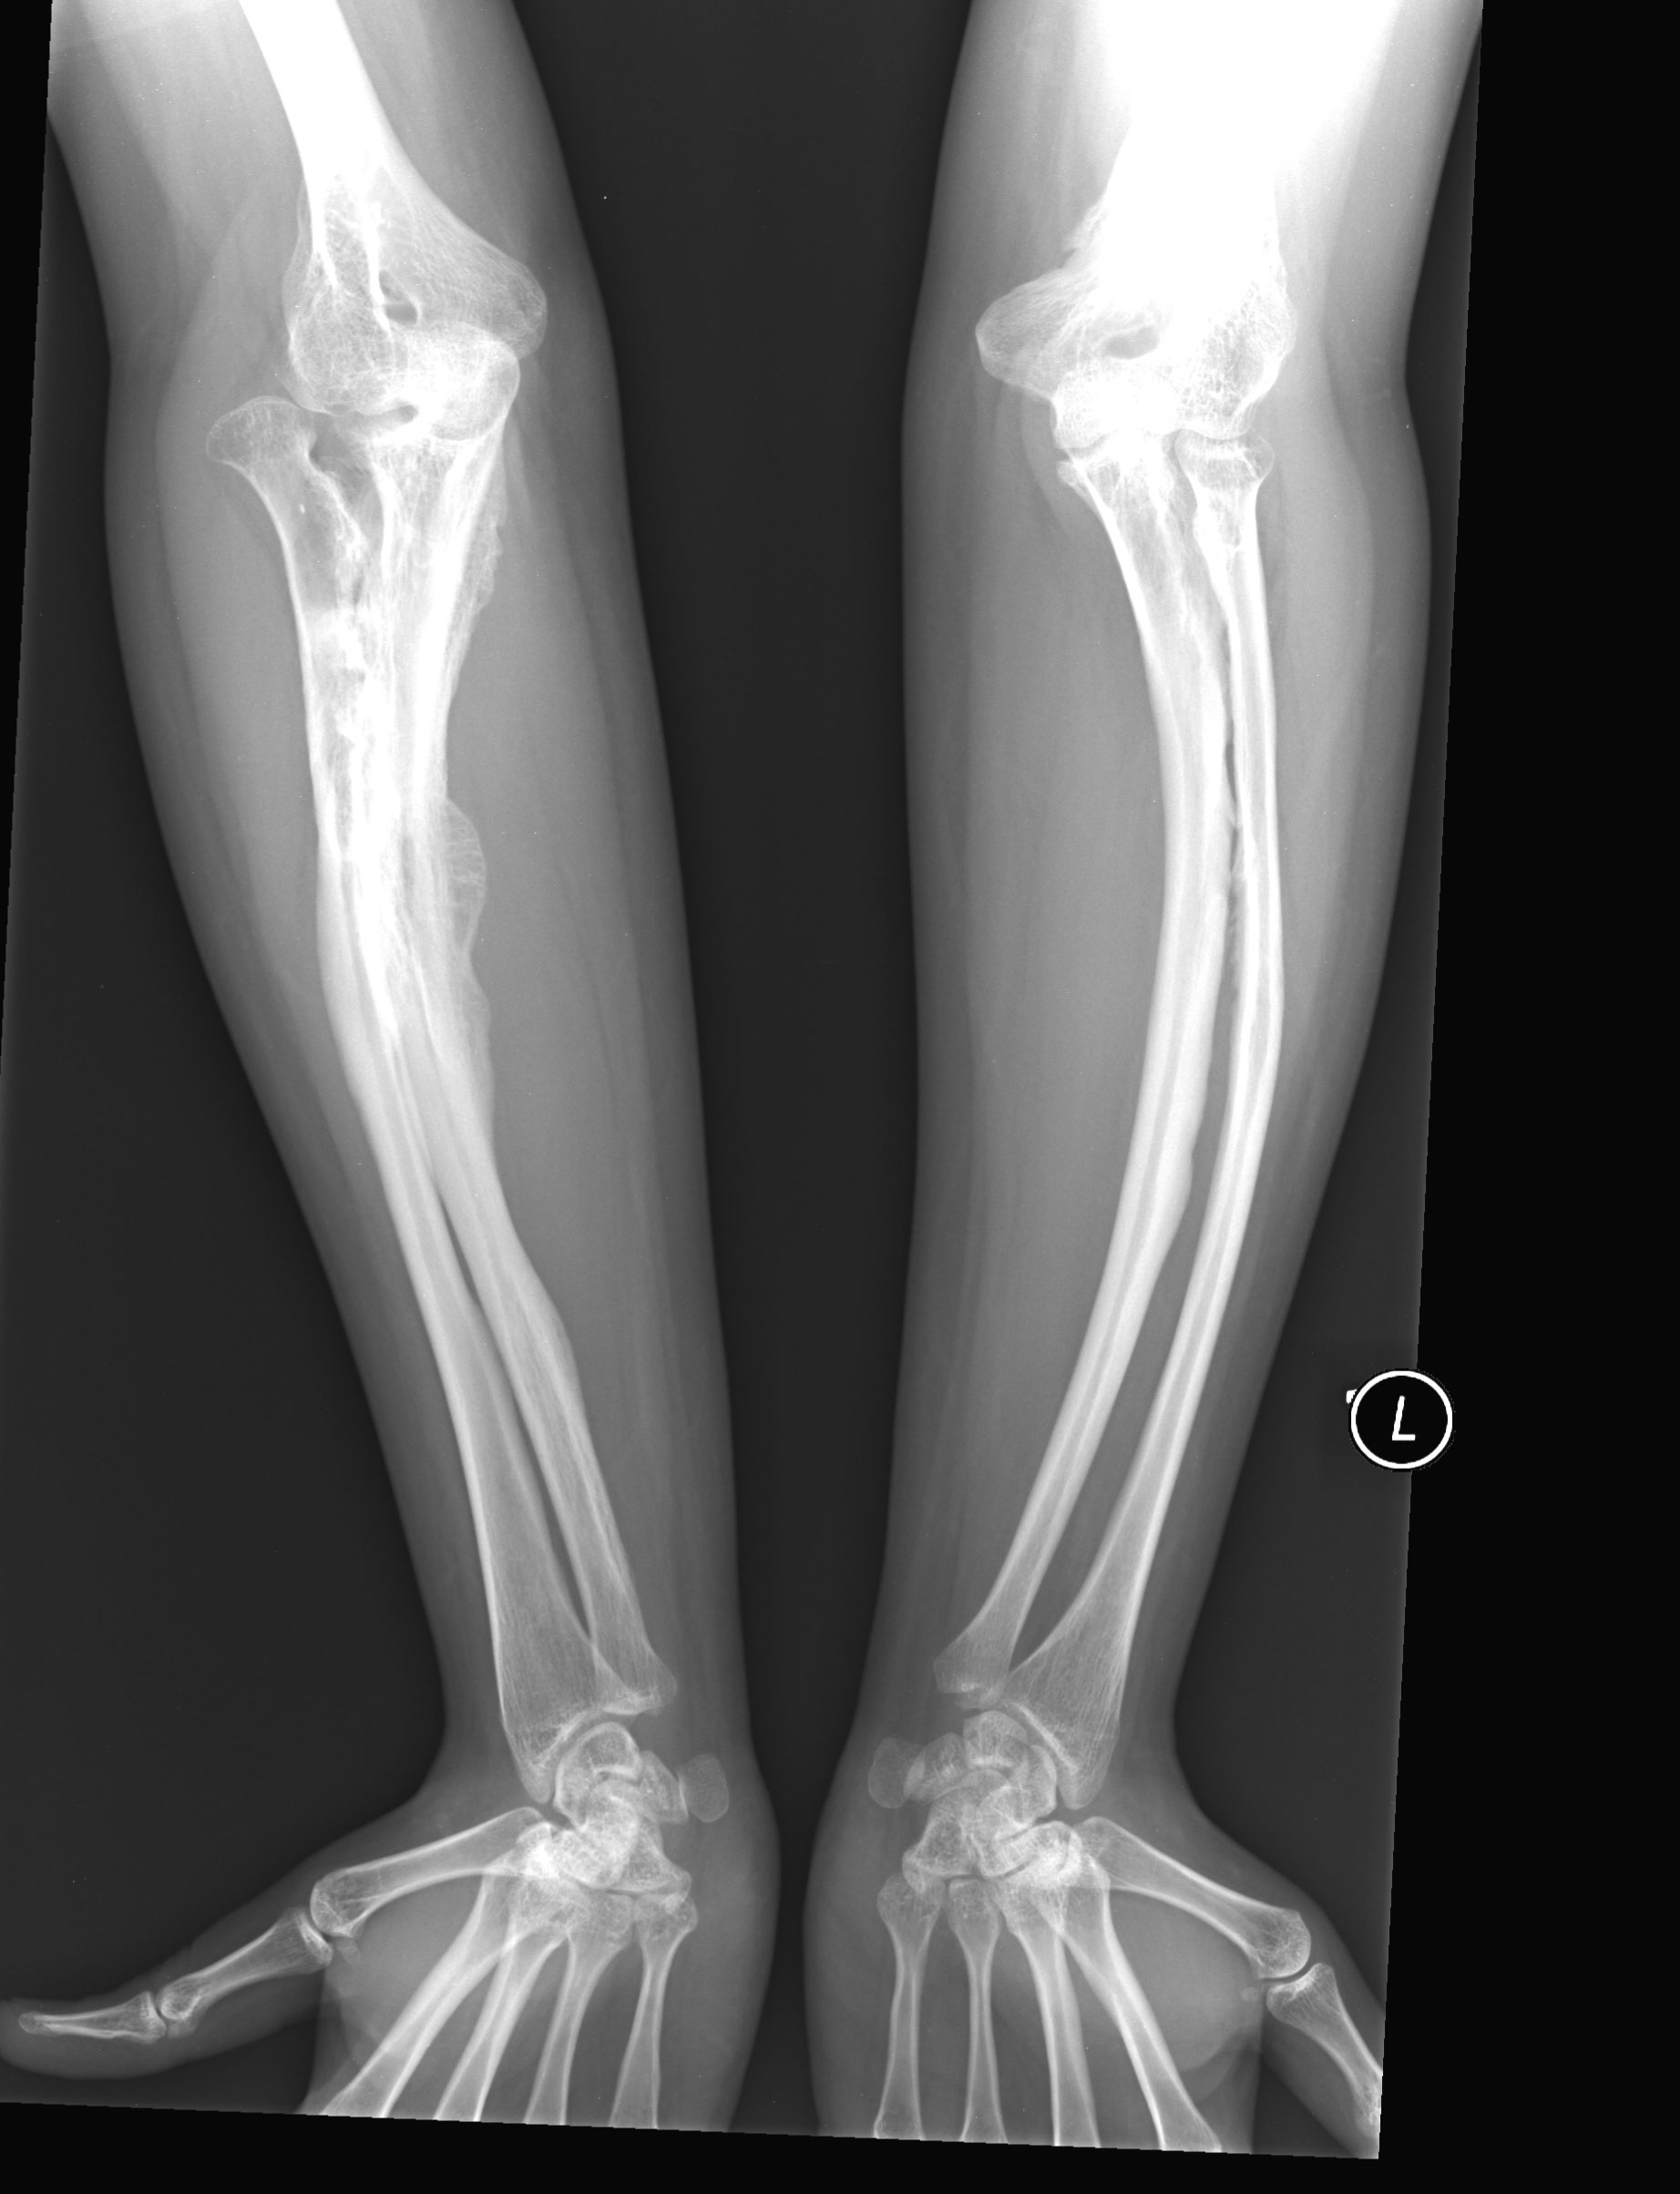 Bowing and fractures seen in osteogenesis imperfecta